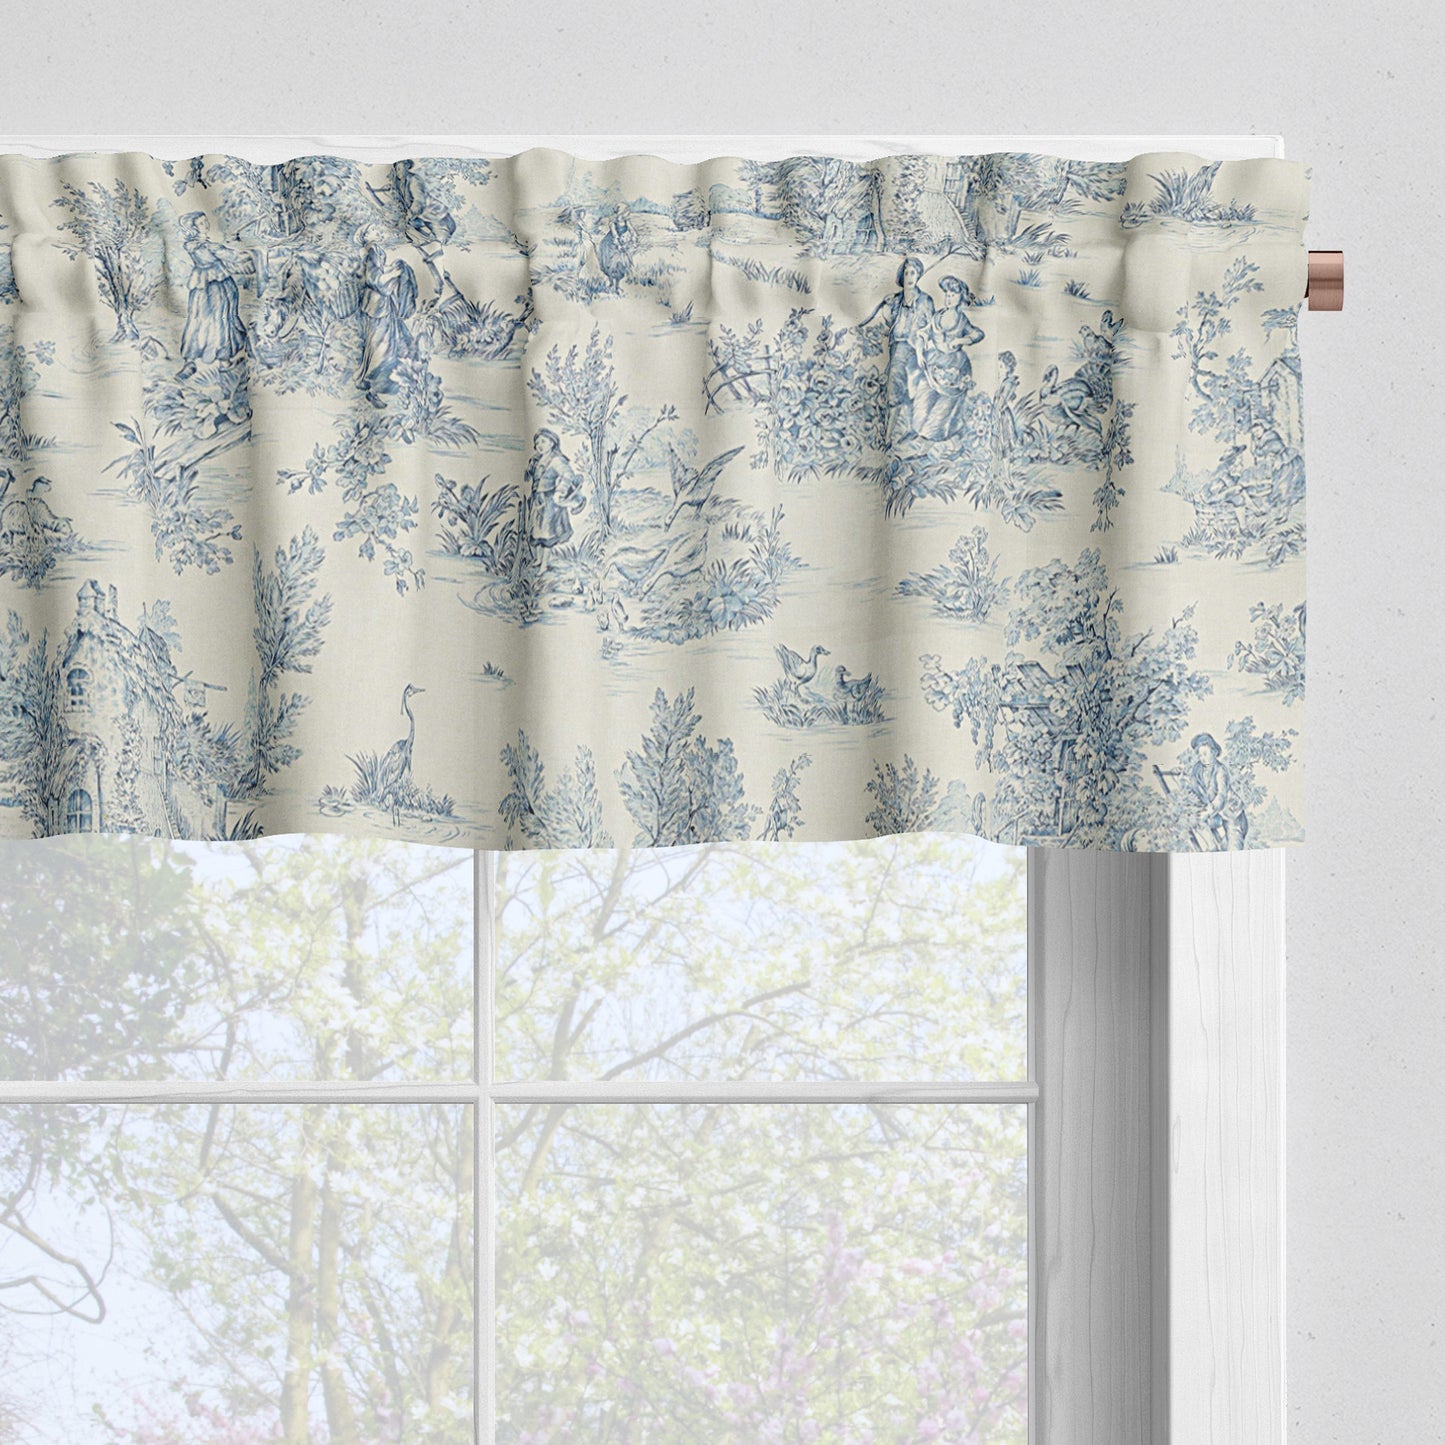 Tailored Valance in Pastorale #2 Blue on Cream French Country Toile